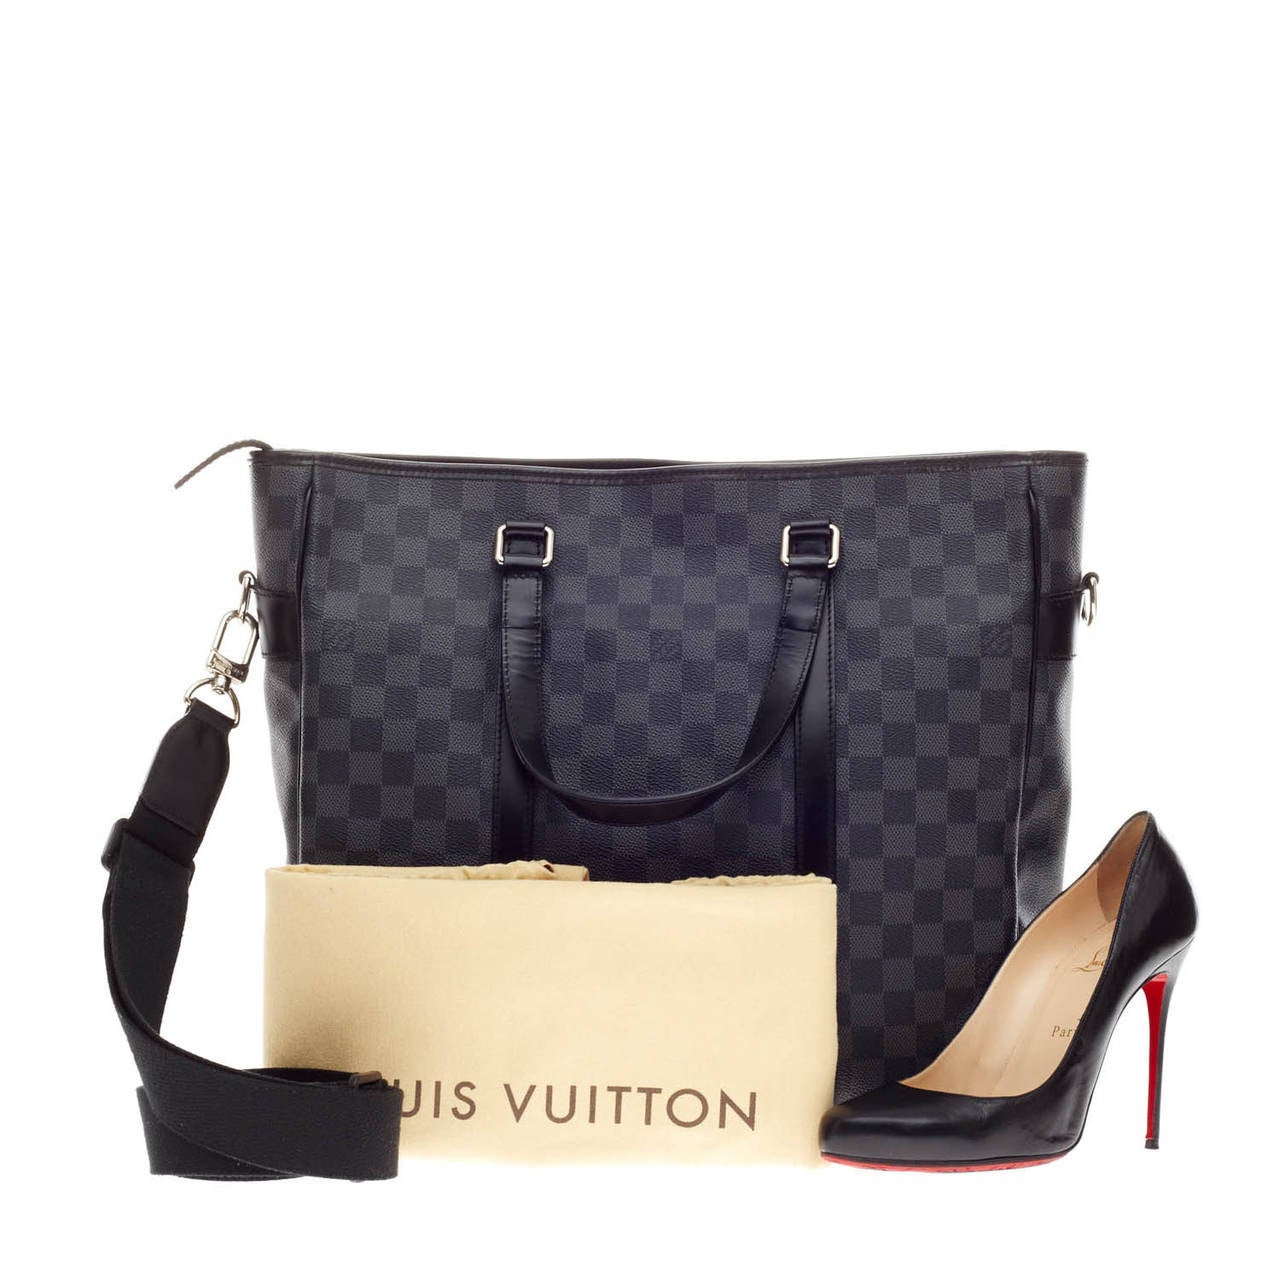 This authentic Louis Vuitton Tadao Tote Damier size MM balances style and functionality perfect for everyday and work excursions. This tote features Louis Vuitton's signature Damier Graphite canvas print with smooth black leather trimmings accents